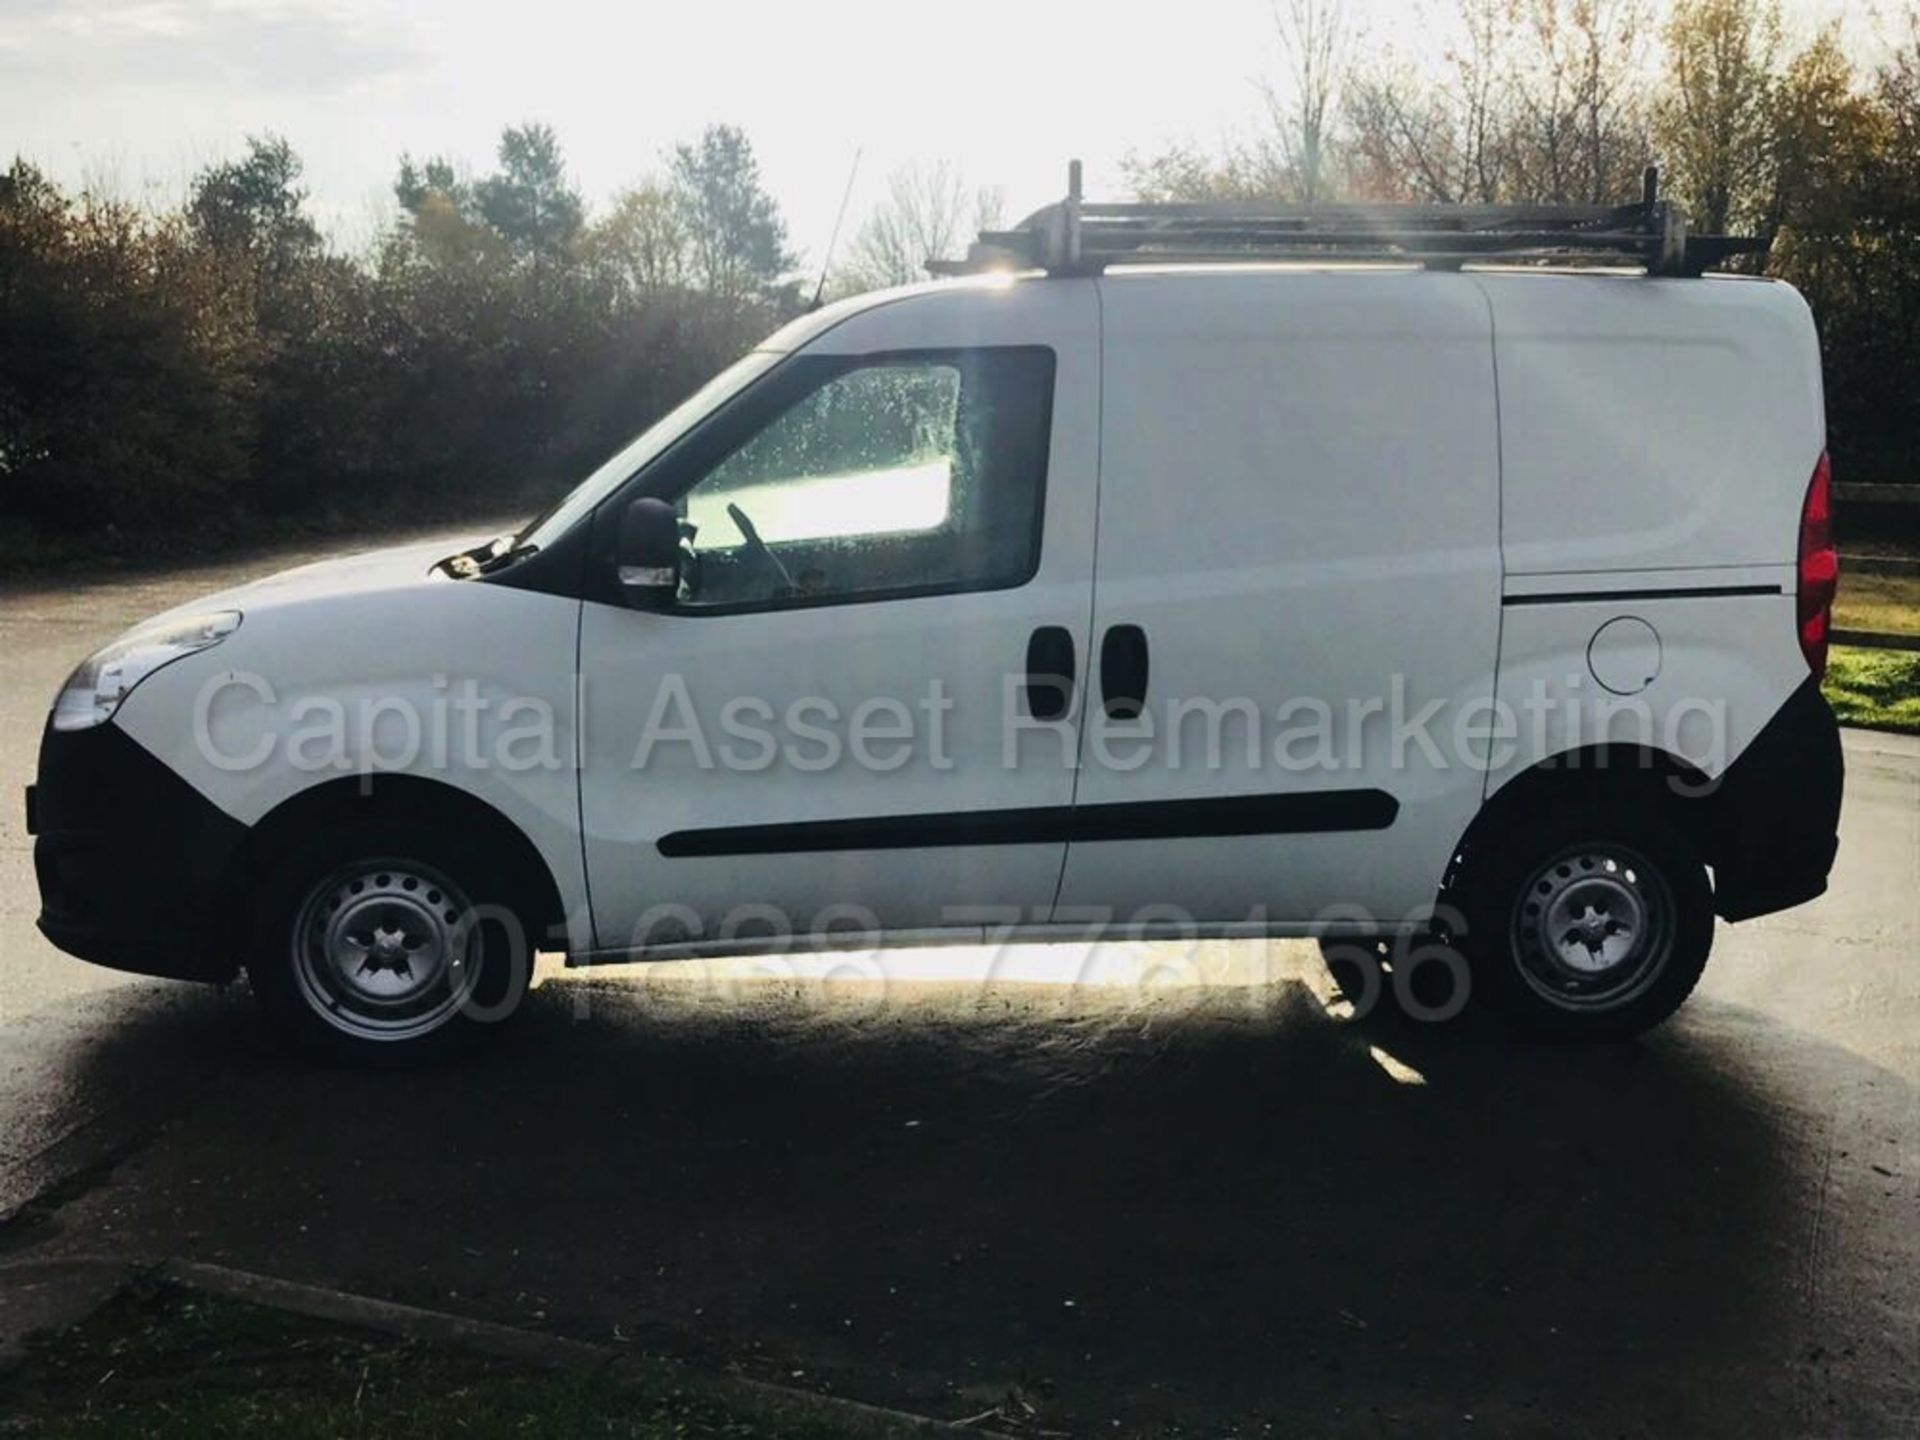 VAUXHALL COMBO 2000 L1H1 (2012 - NEW MODEL) '1.6 CDTI - 105 BHP - STOP / START' (1 OWNER FROM NEW) - Image 2 of 15